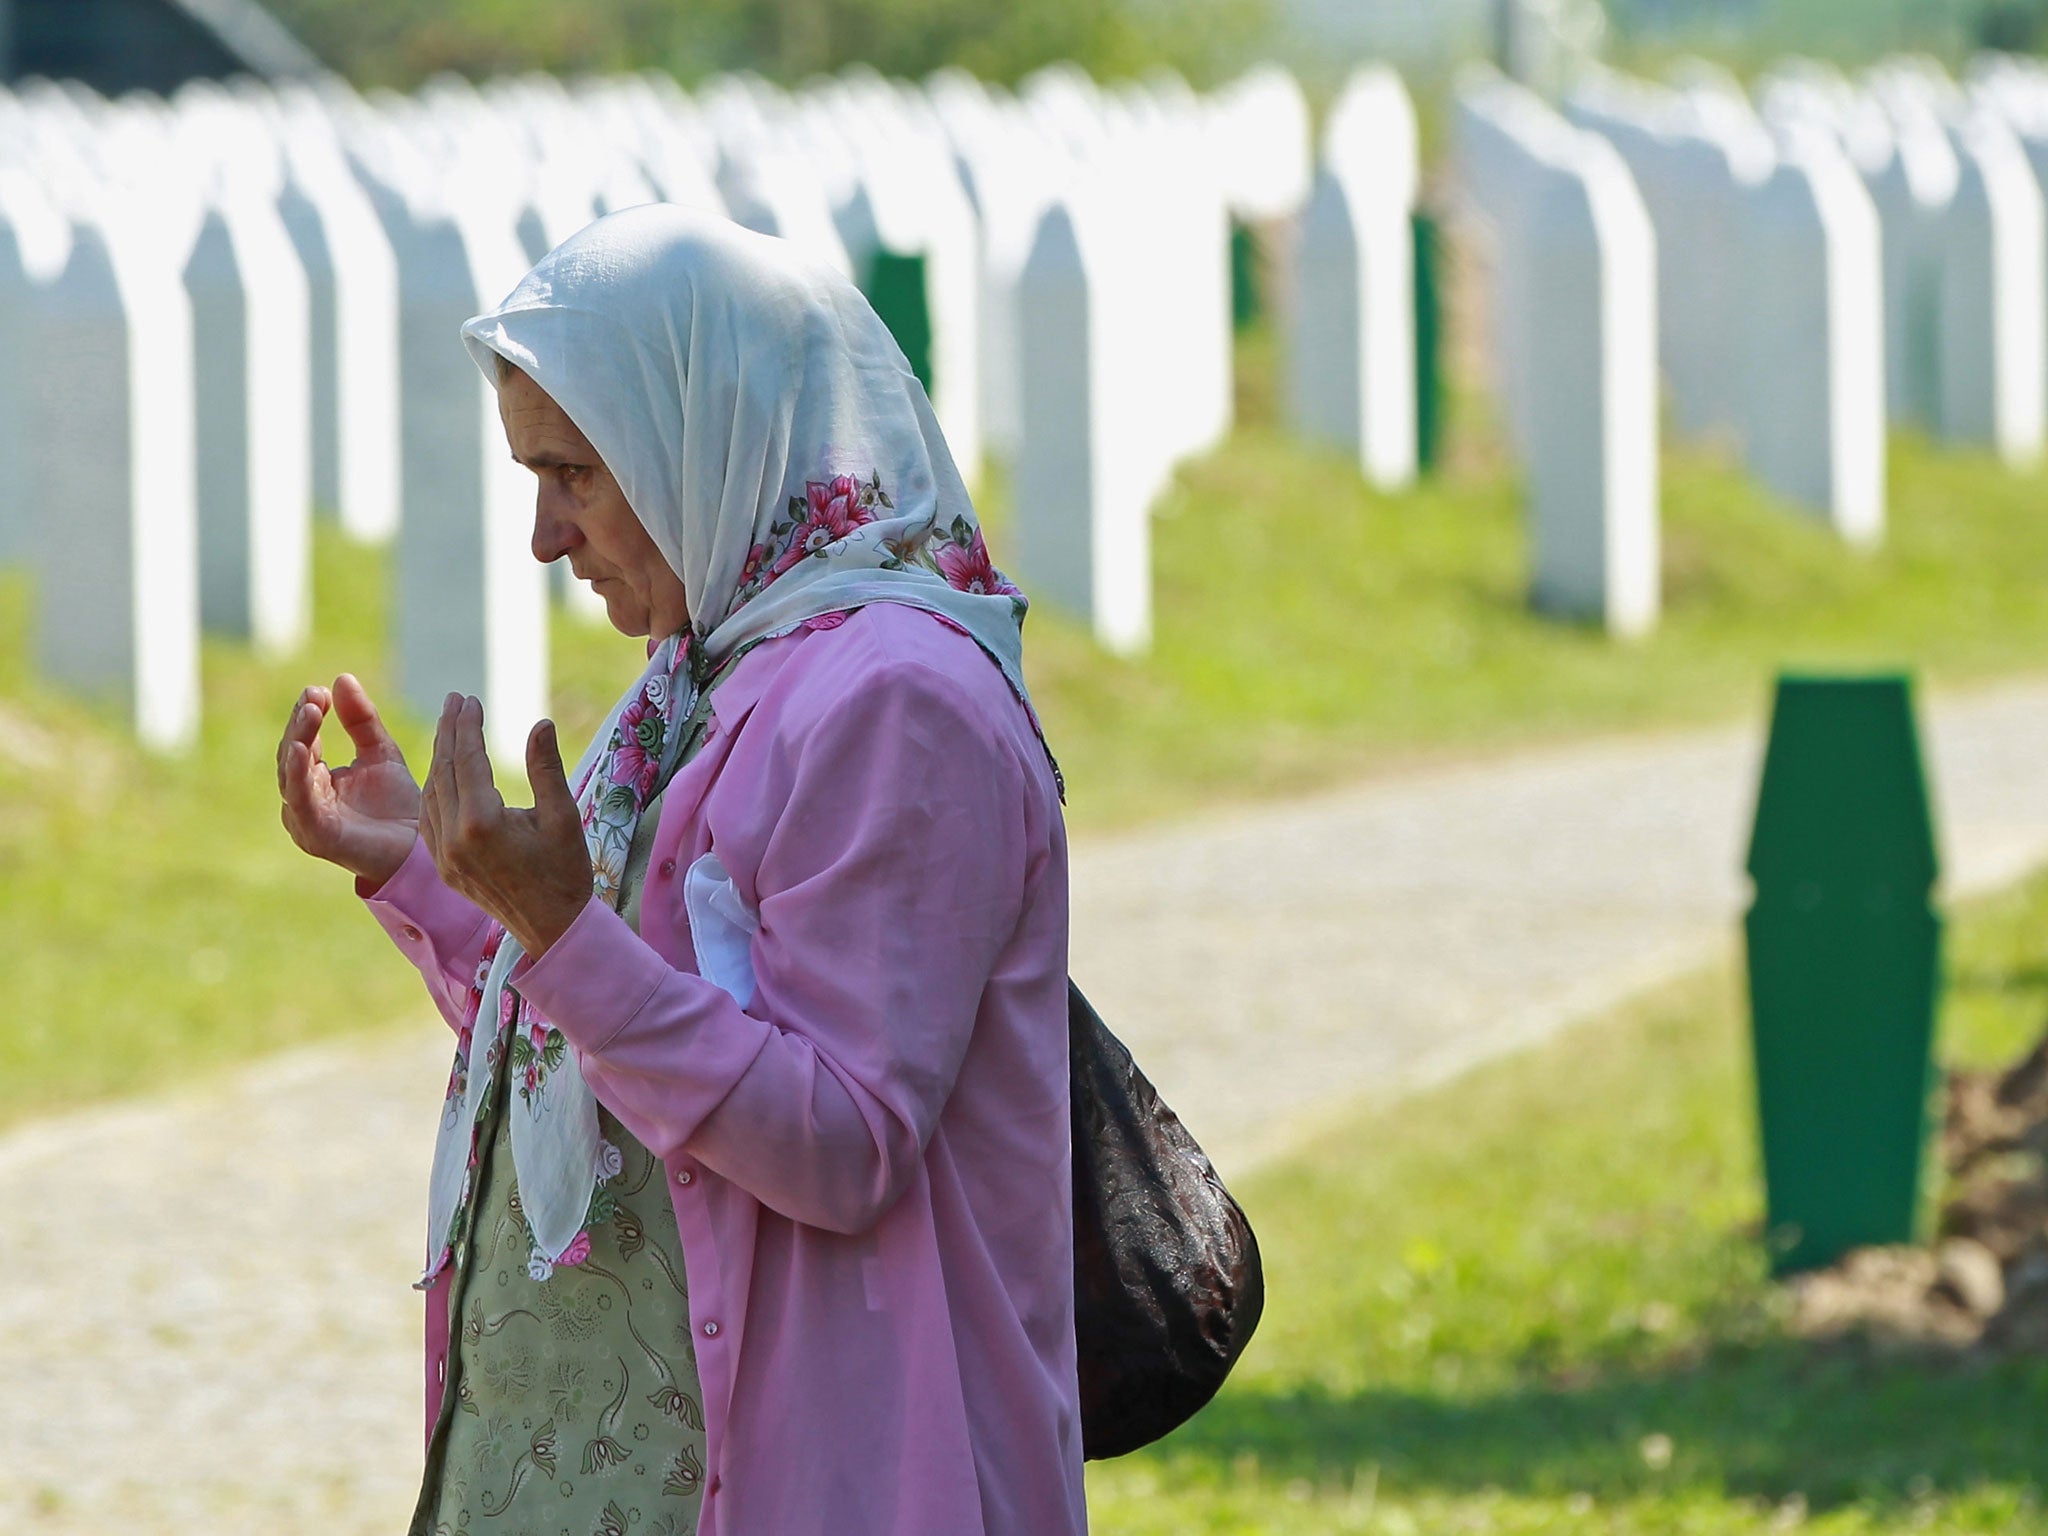 An elderly woman prays at a gravesite among the thousands of victims of the 1995 Srebrenica massacre buried at the Potocari cemetery and memorial near Srebrenica on July 9, 2011 in Potocari, Bosnia and Herzegovina.